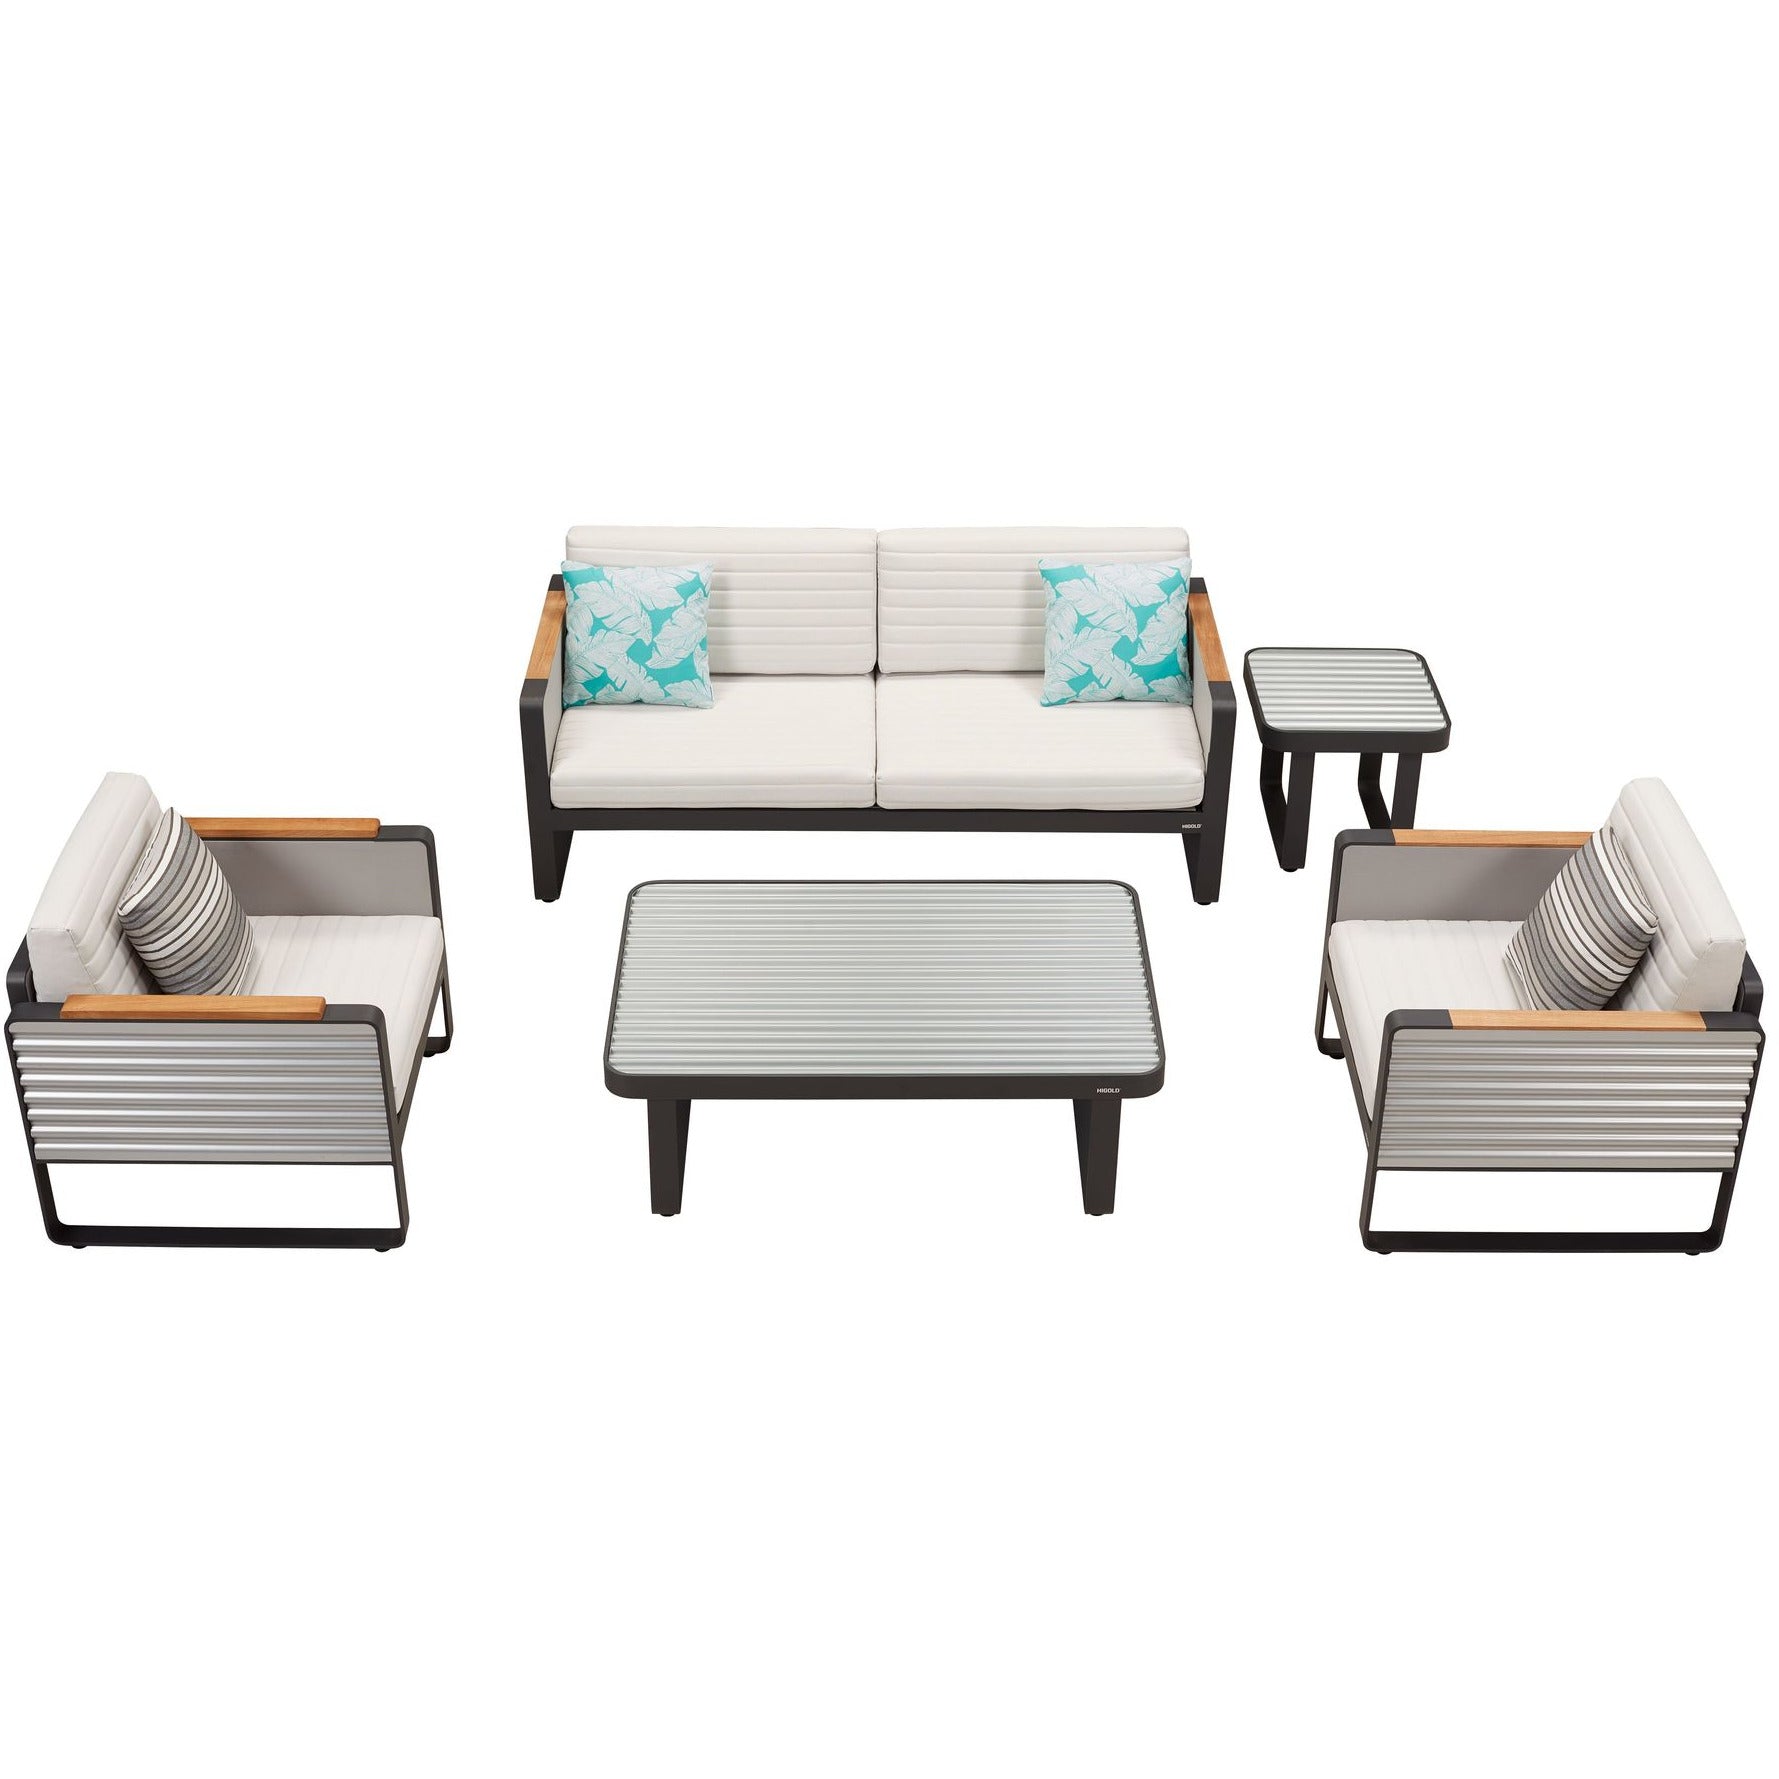 Airport 2 Seat Sofa, Coffee & Side Table Set - PadioLiving - Airport 2 Seat Sofa, Coffee & Side Table Set - Outdoor Sofa and Coffee Table Set - Black Trim - PadioLiving